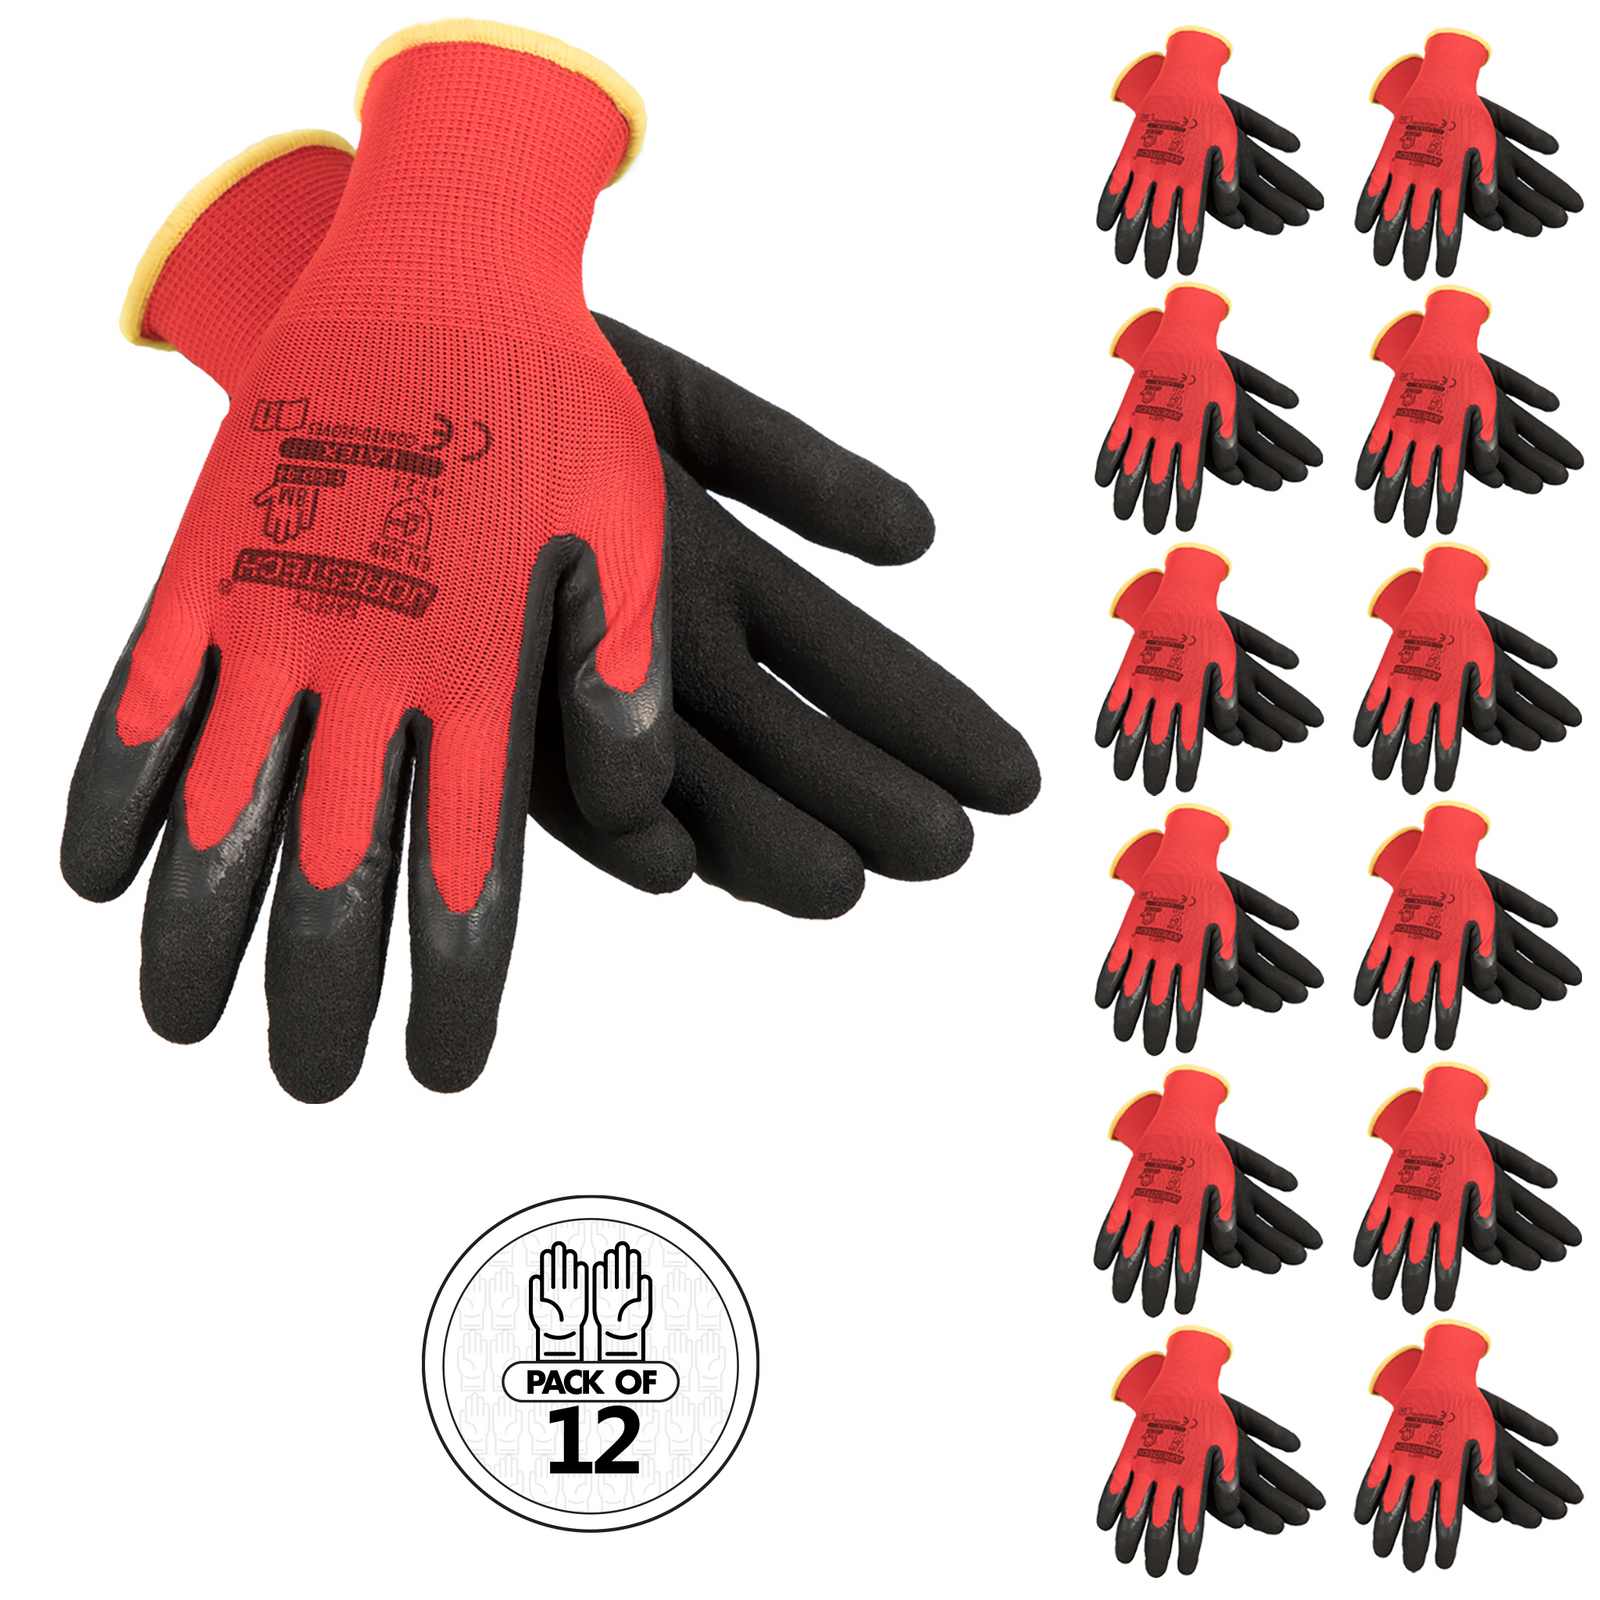 JORESTECH Palm Dipped Latex Coated Seamless Knit Work Gloves PPE. 12 Pack (S-GD-04)